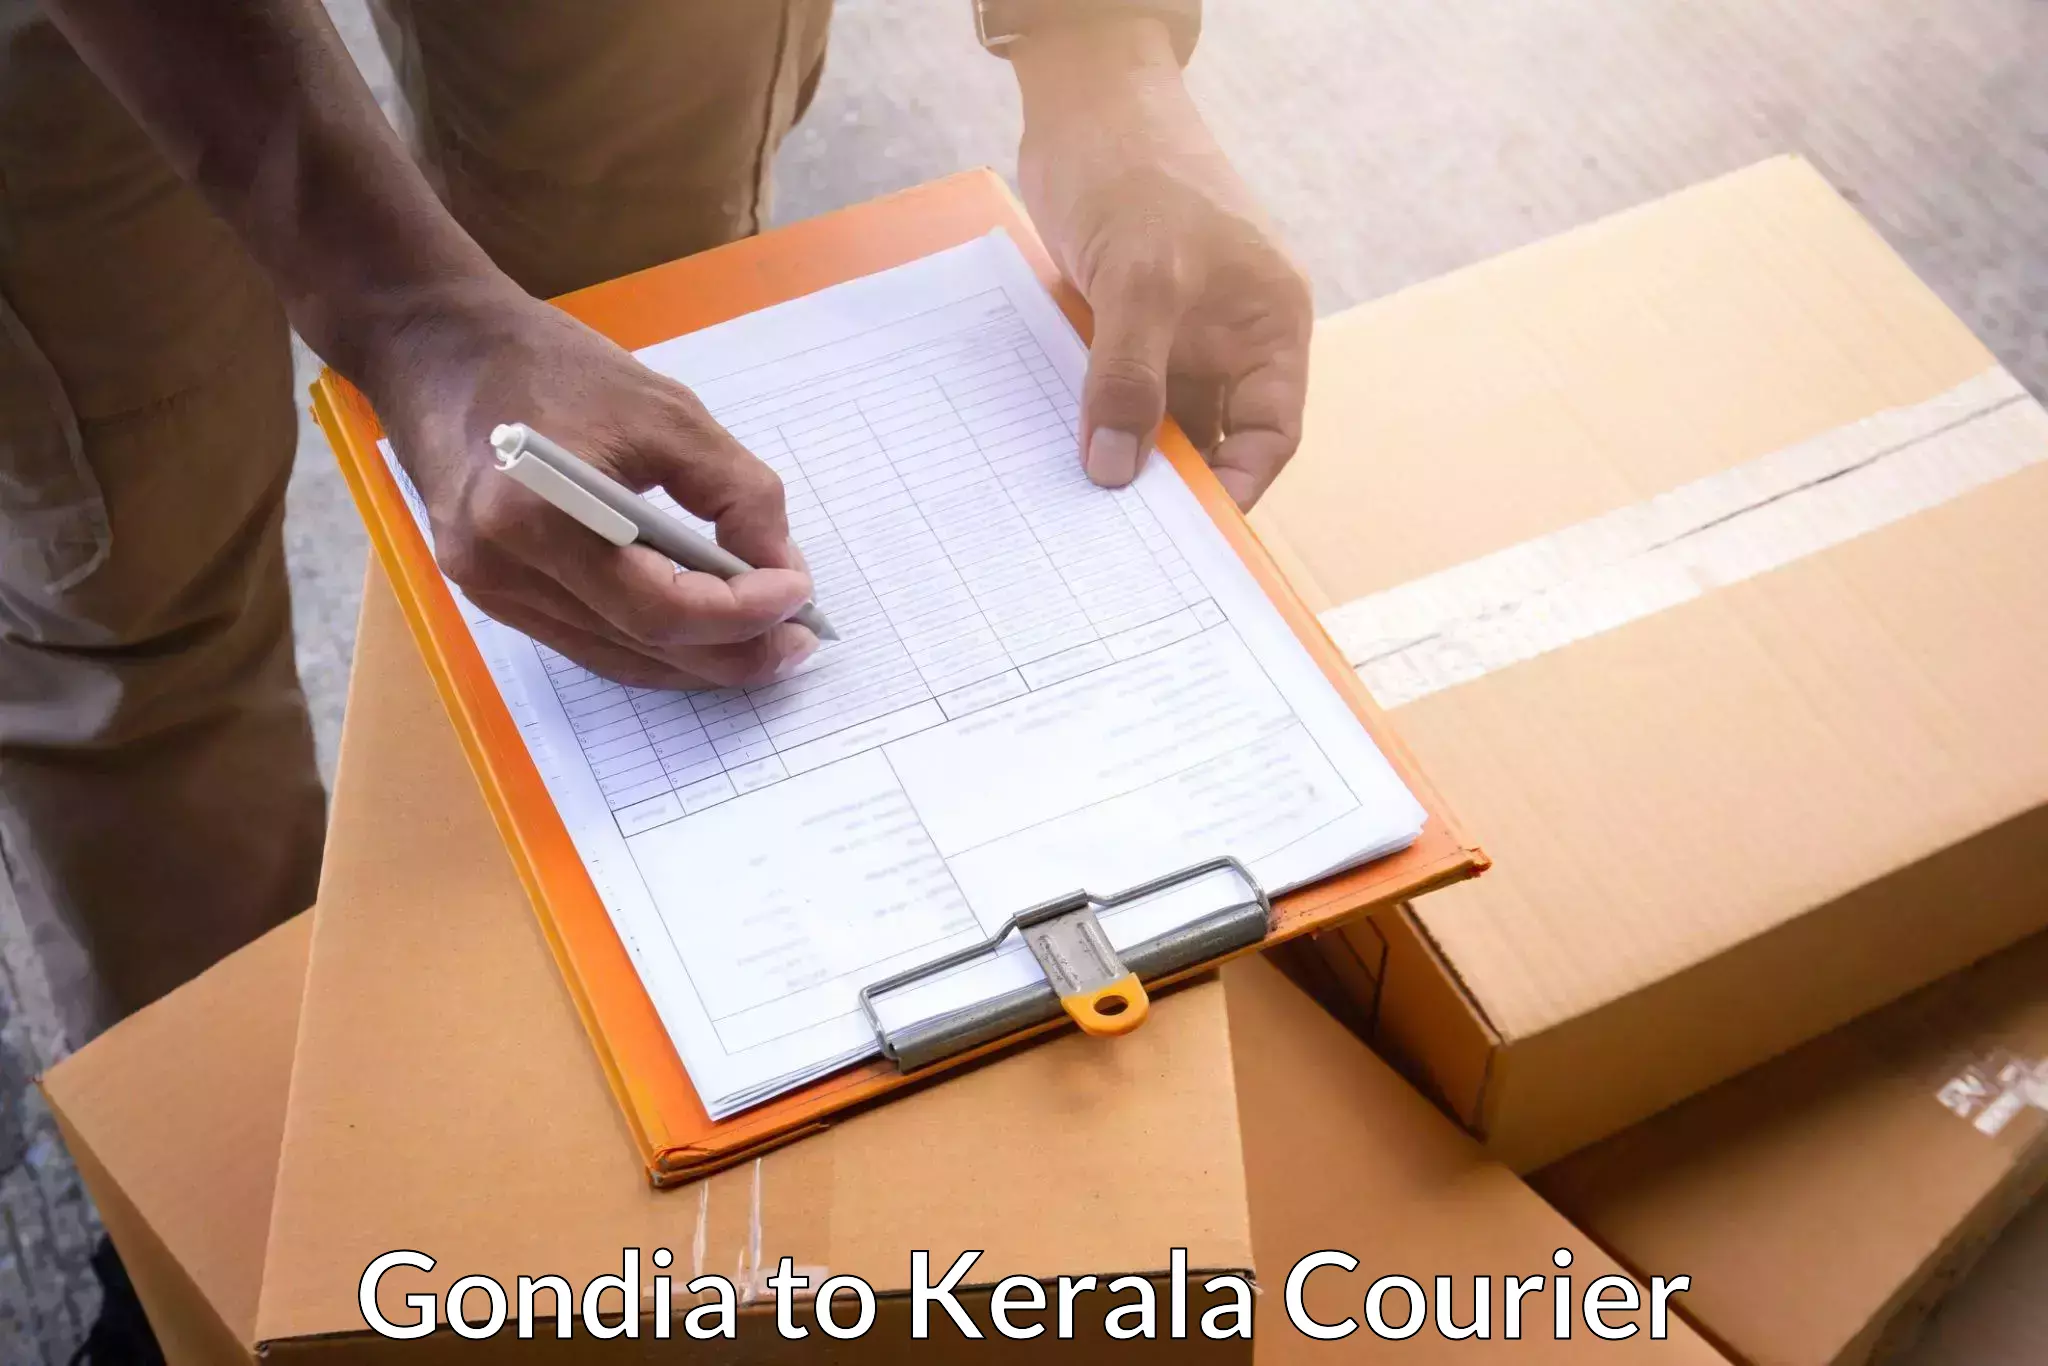 Enhanced tracking features in Gondia to Kerala